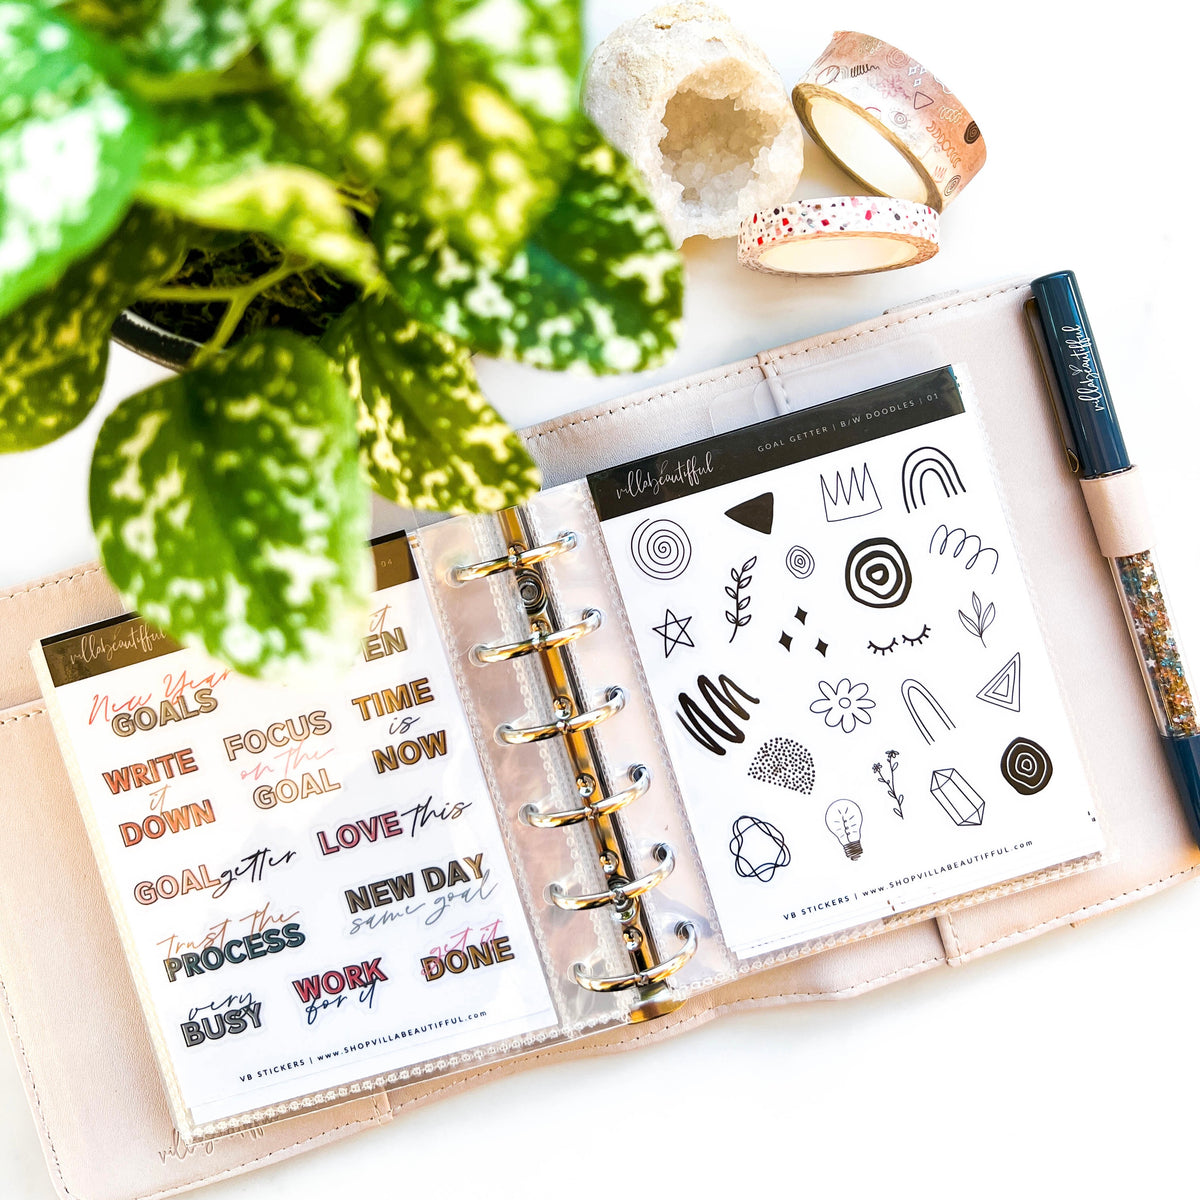 VB Sticker Planner | Nude IMPERFECT